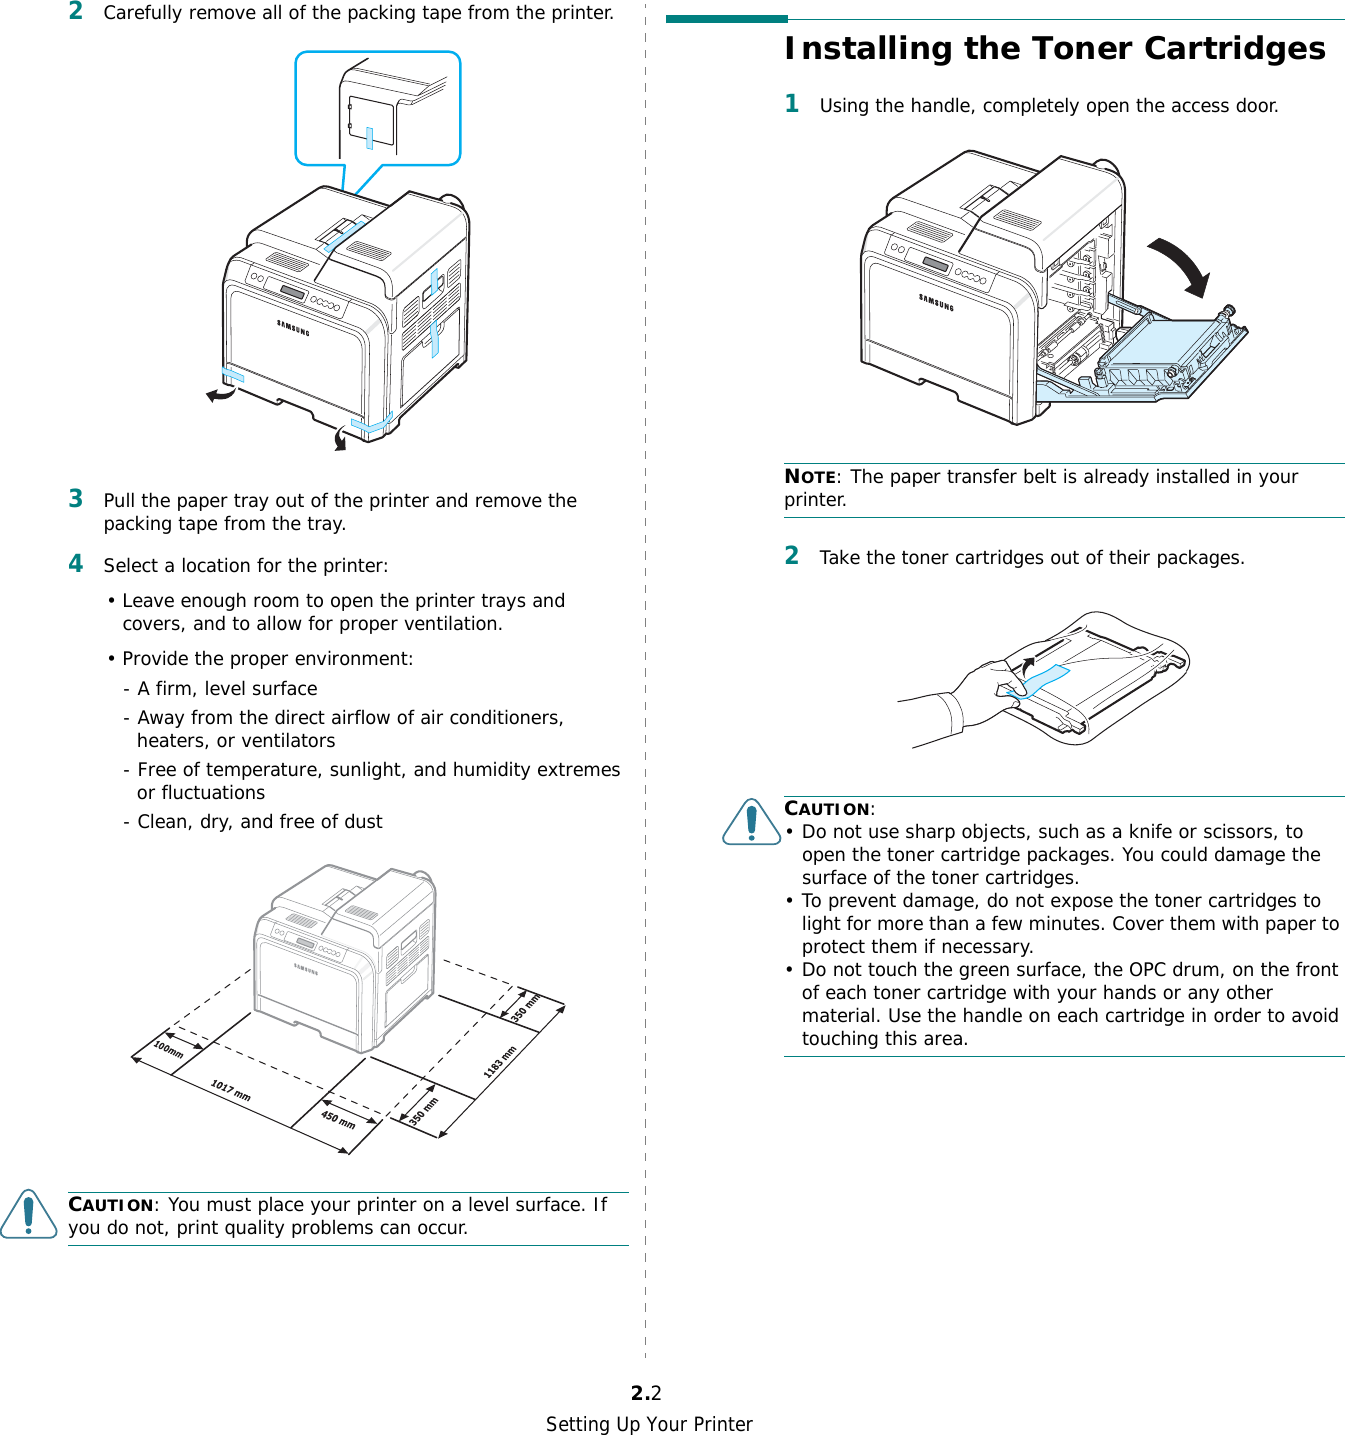 Setting Up Your Printer2.22Carefully remove all of the packing tape from the printer. 3Pull the paper tray out of the printer and remove the packing tape from the tray.4Select a location for the printer:• Leave enough room to open the printer trays and covers, and to allow for proper ventilation.• Provide the proper environment:- A firm, level surface- Away from the direct airflow of air conditioners, heaters, or ventilators- Free of temperature, sunlight, and humidity extremes or fluctuations- Clean, dry, and free of dustCAUTION: You must place your printer on a level surface. If you do not, print quality problems can occur.Installing the Toner Cartridges1Using the handle, completely open the access door. NOTE: The paper transfer belt is already installed in your printer.2Take the toner cartridges out of their packages.CAUTION:• Do not use sharp objects, such as a knife or scissors, to open the toner cartridge packages. You could damage the surface of the toner cartridges.• To prevent damage, do not expose the toner cartridges to light for more than a few minutes. Cover them with paper to protect them if necessary.• Do not touch the green surface, the OPC drum, on the front of each toner cartridge with your hands or any other material. Use the handle on each cartridge in order to avoid touching this area.